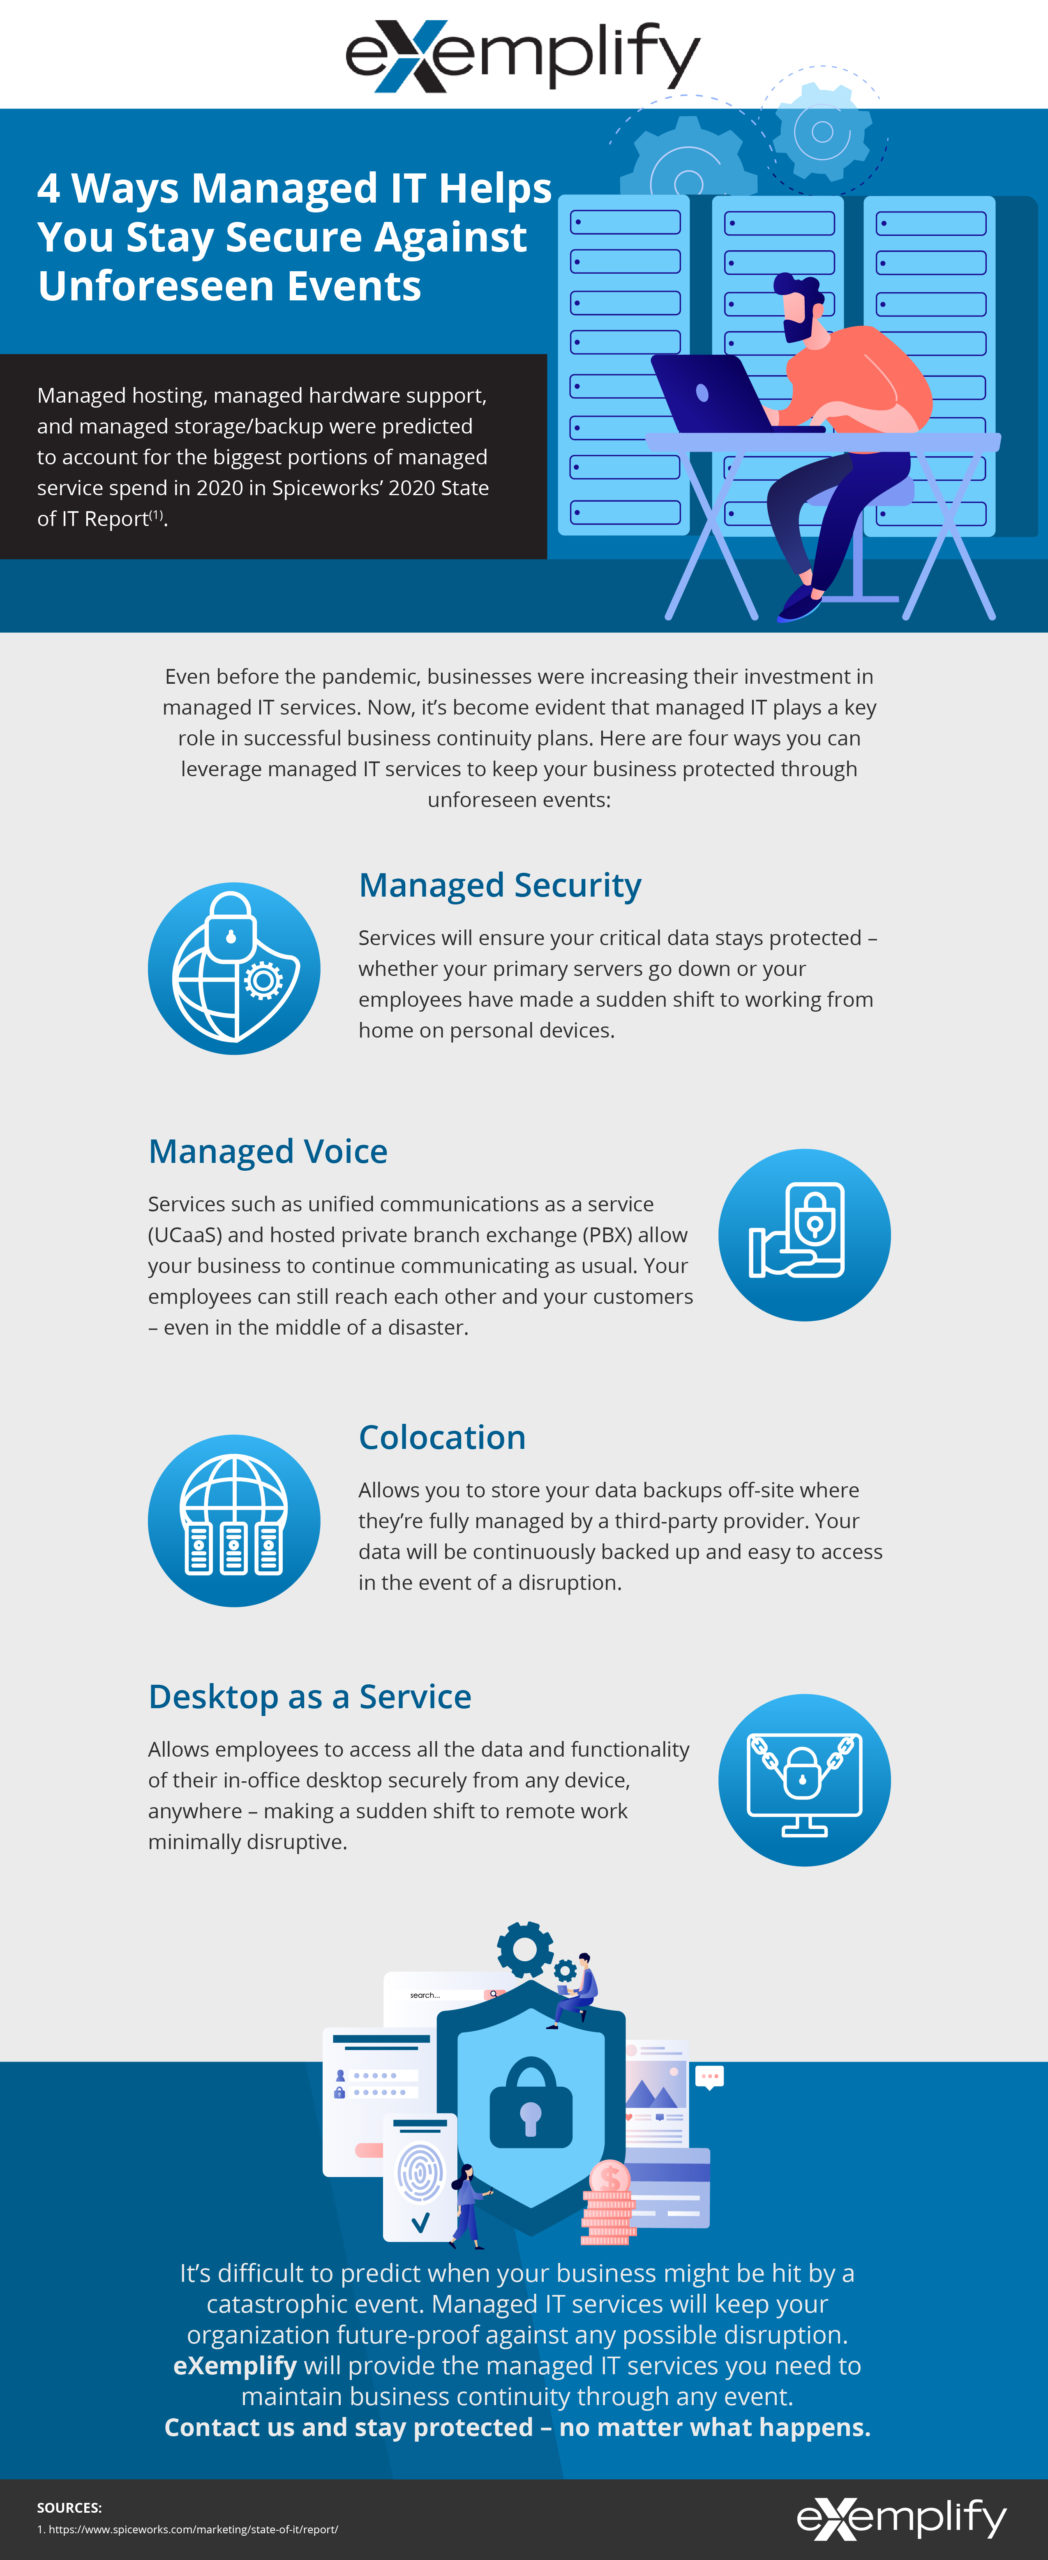 Businesses seeking to continue operating smoothly through any event need to leverage managed IT services.